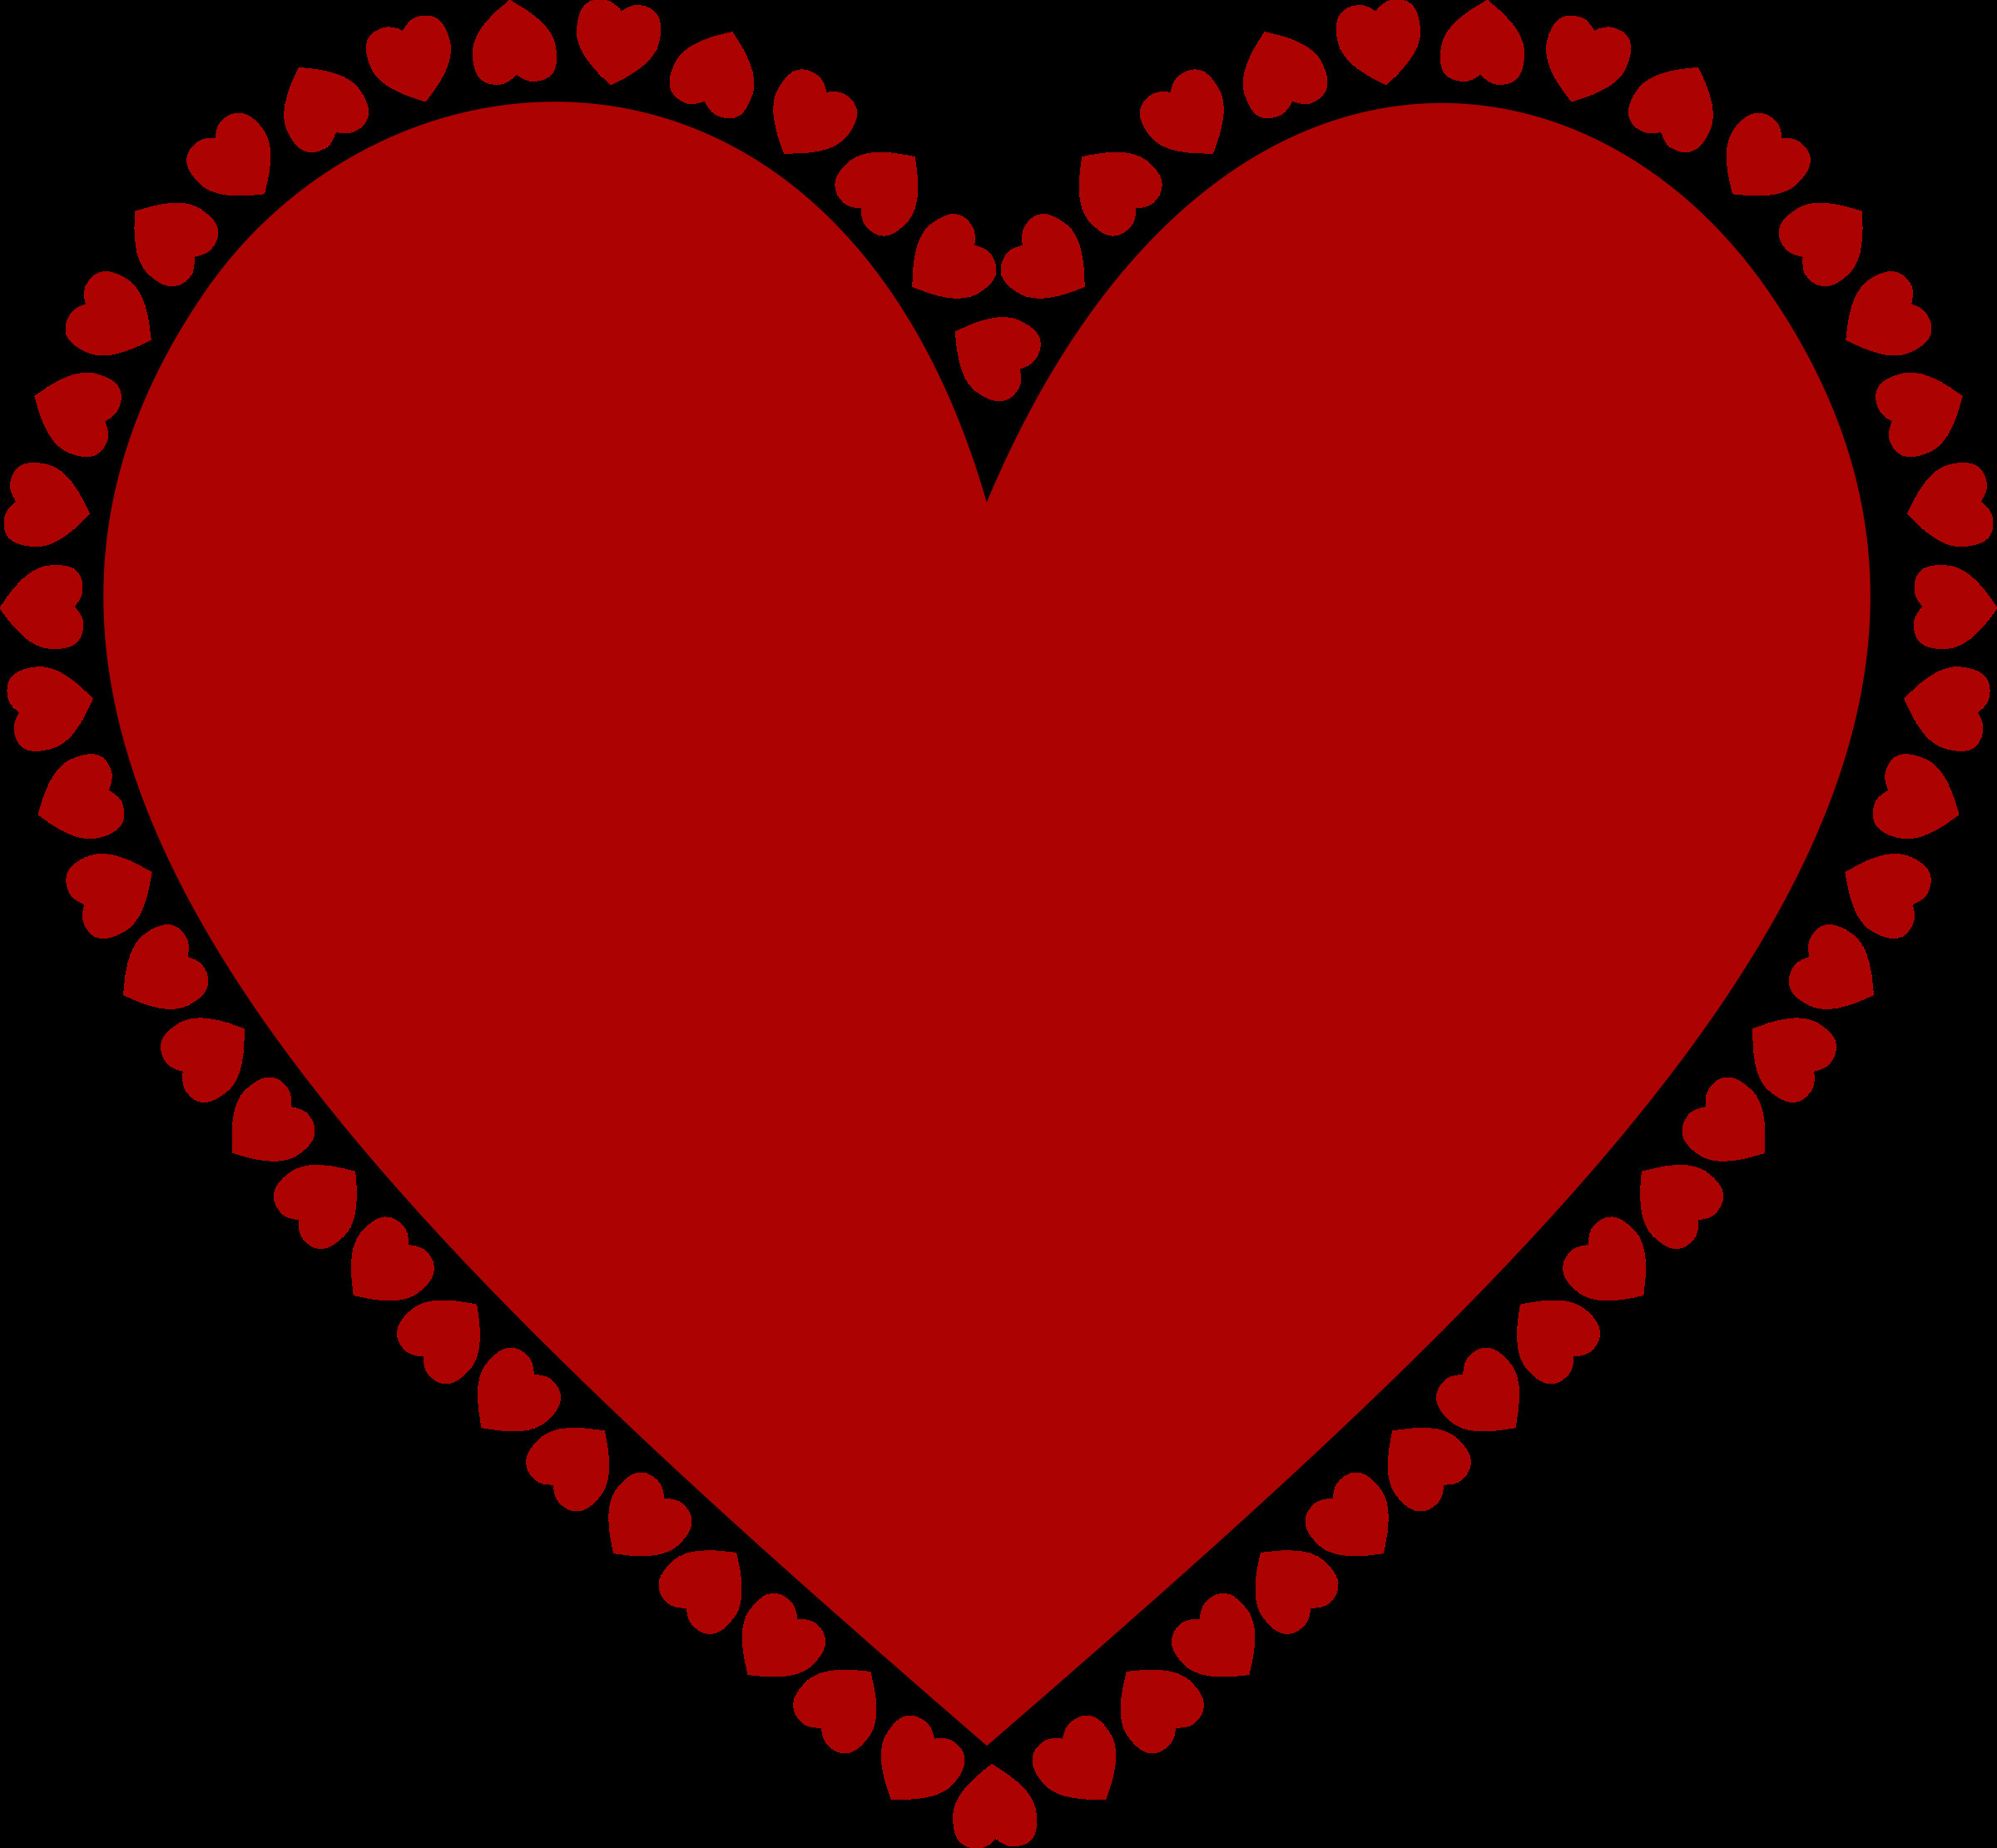 Drawing Heart Gif Clipart Frame Of Hearts A Hearts A Heart Heart Frame Frame